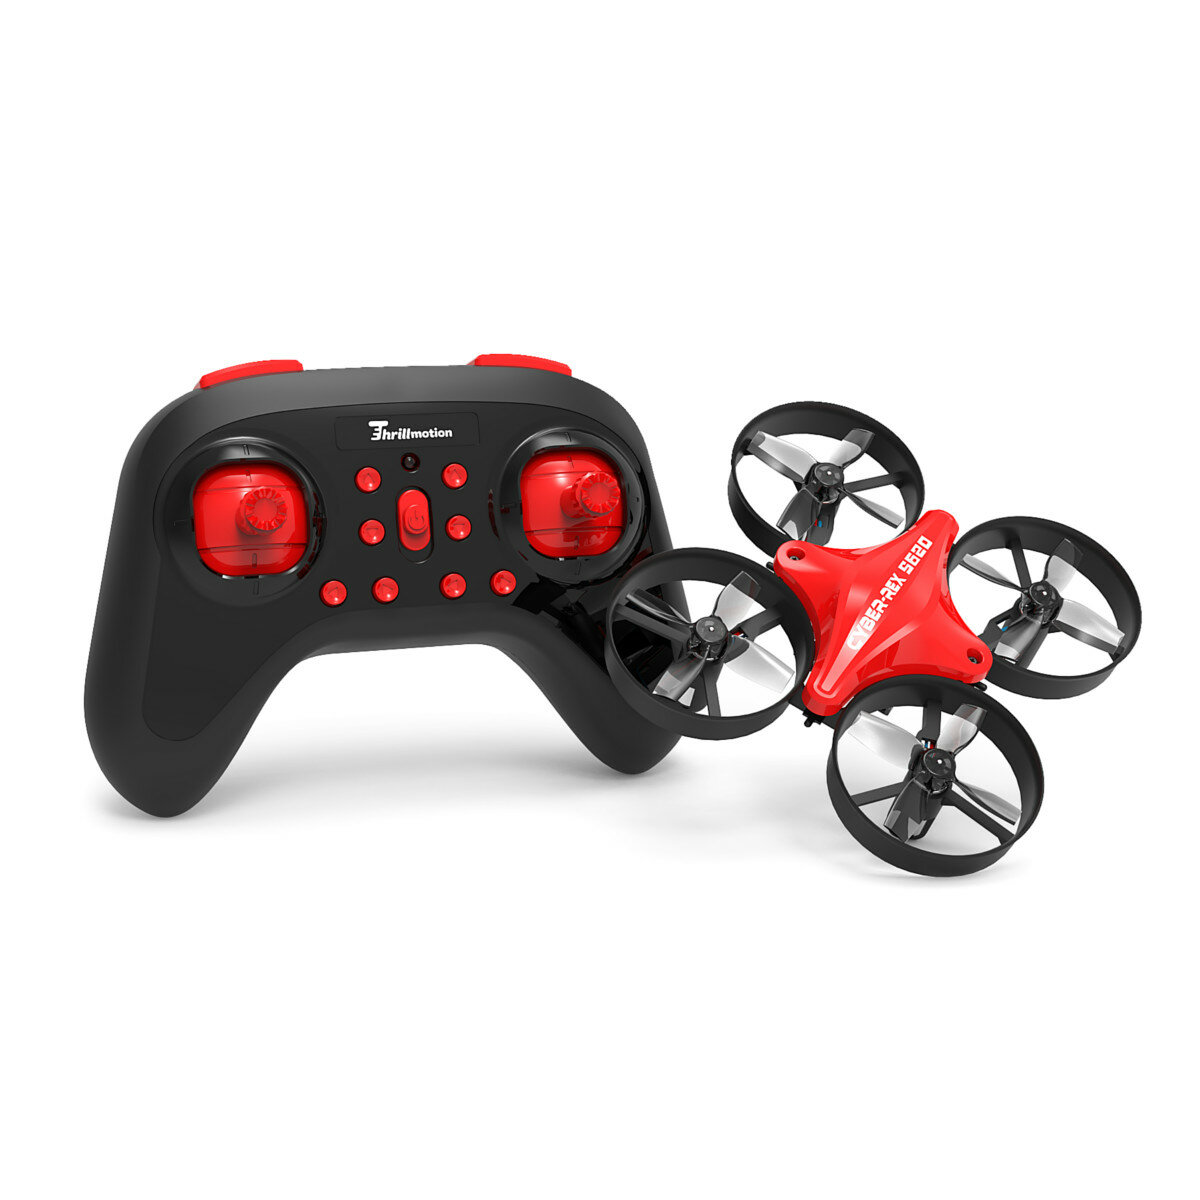 Emax Thrill Motion Cyber-Rex S620 Altitude Hold Headless Mode 360° Rolling Two Batteries 2.4G 6CH Beginner Flight Practice RC Drone Quadcopter RTF CO